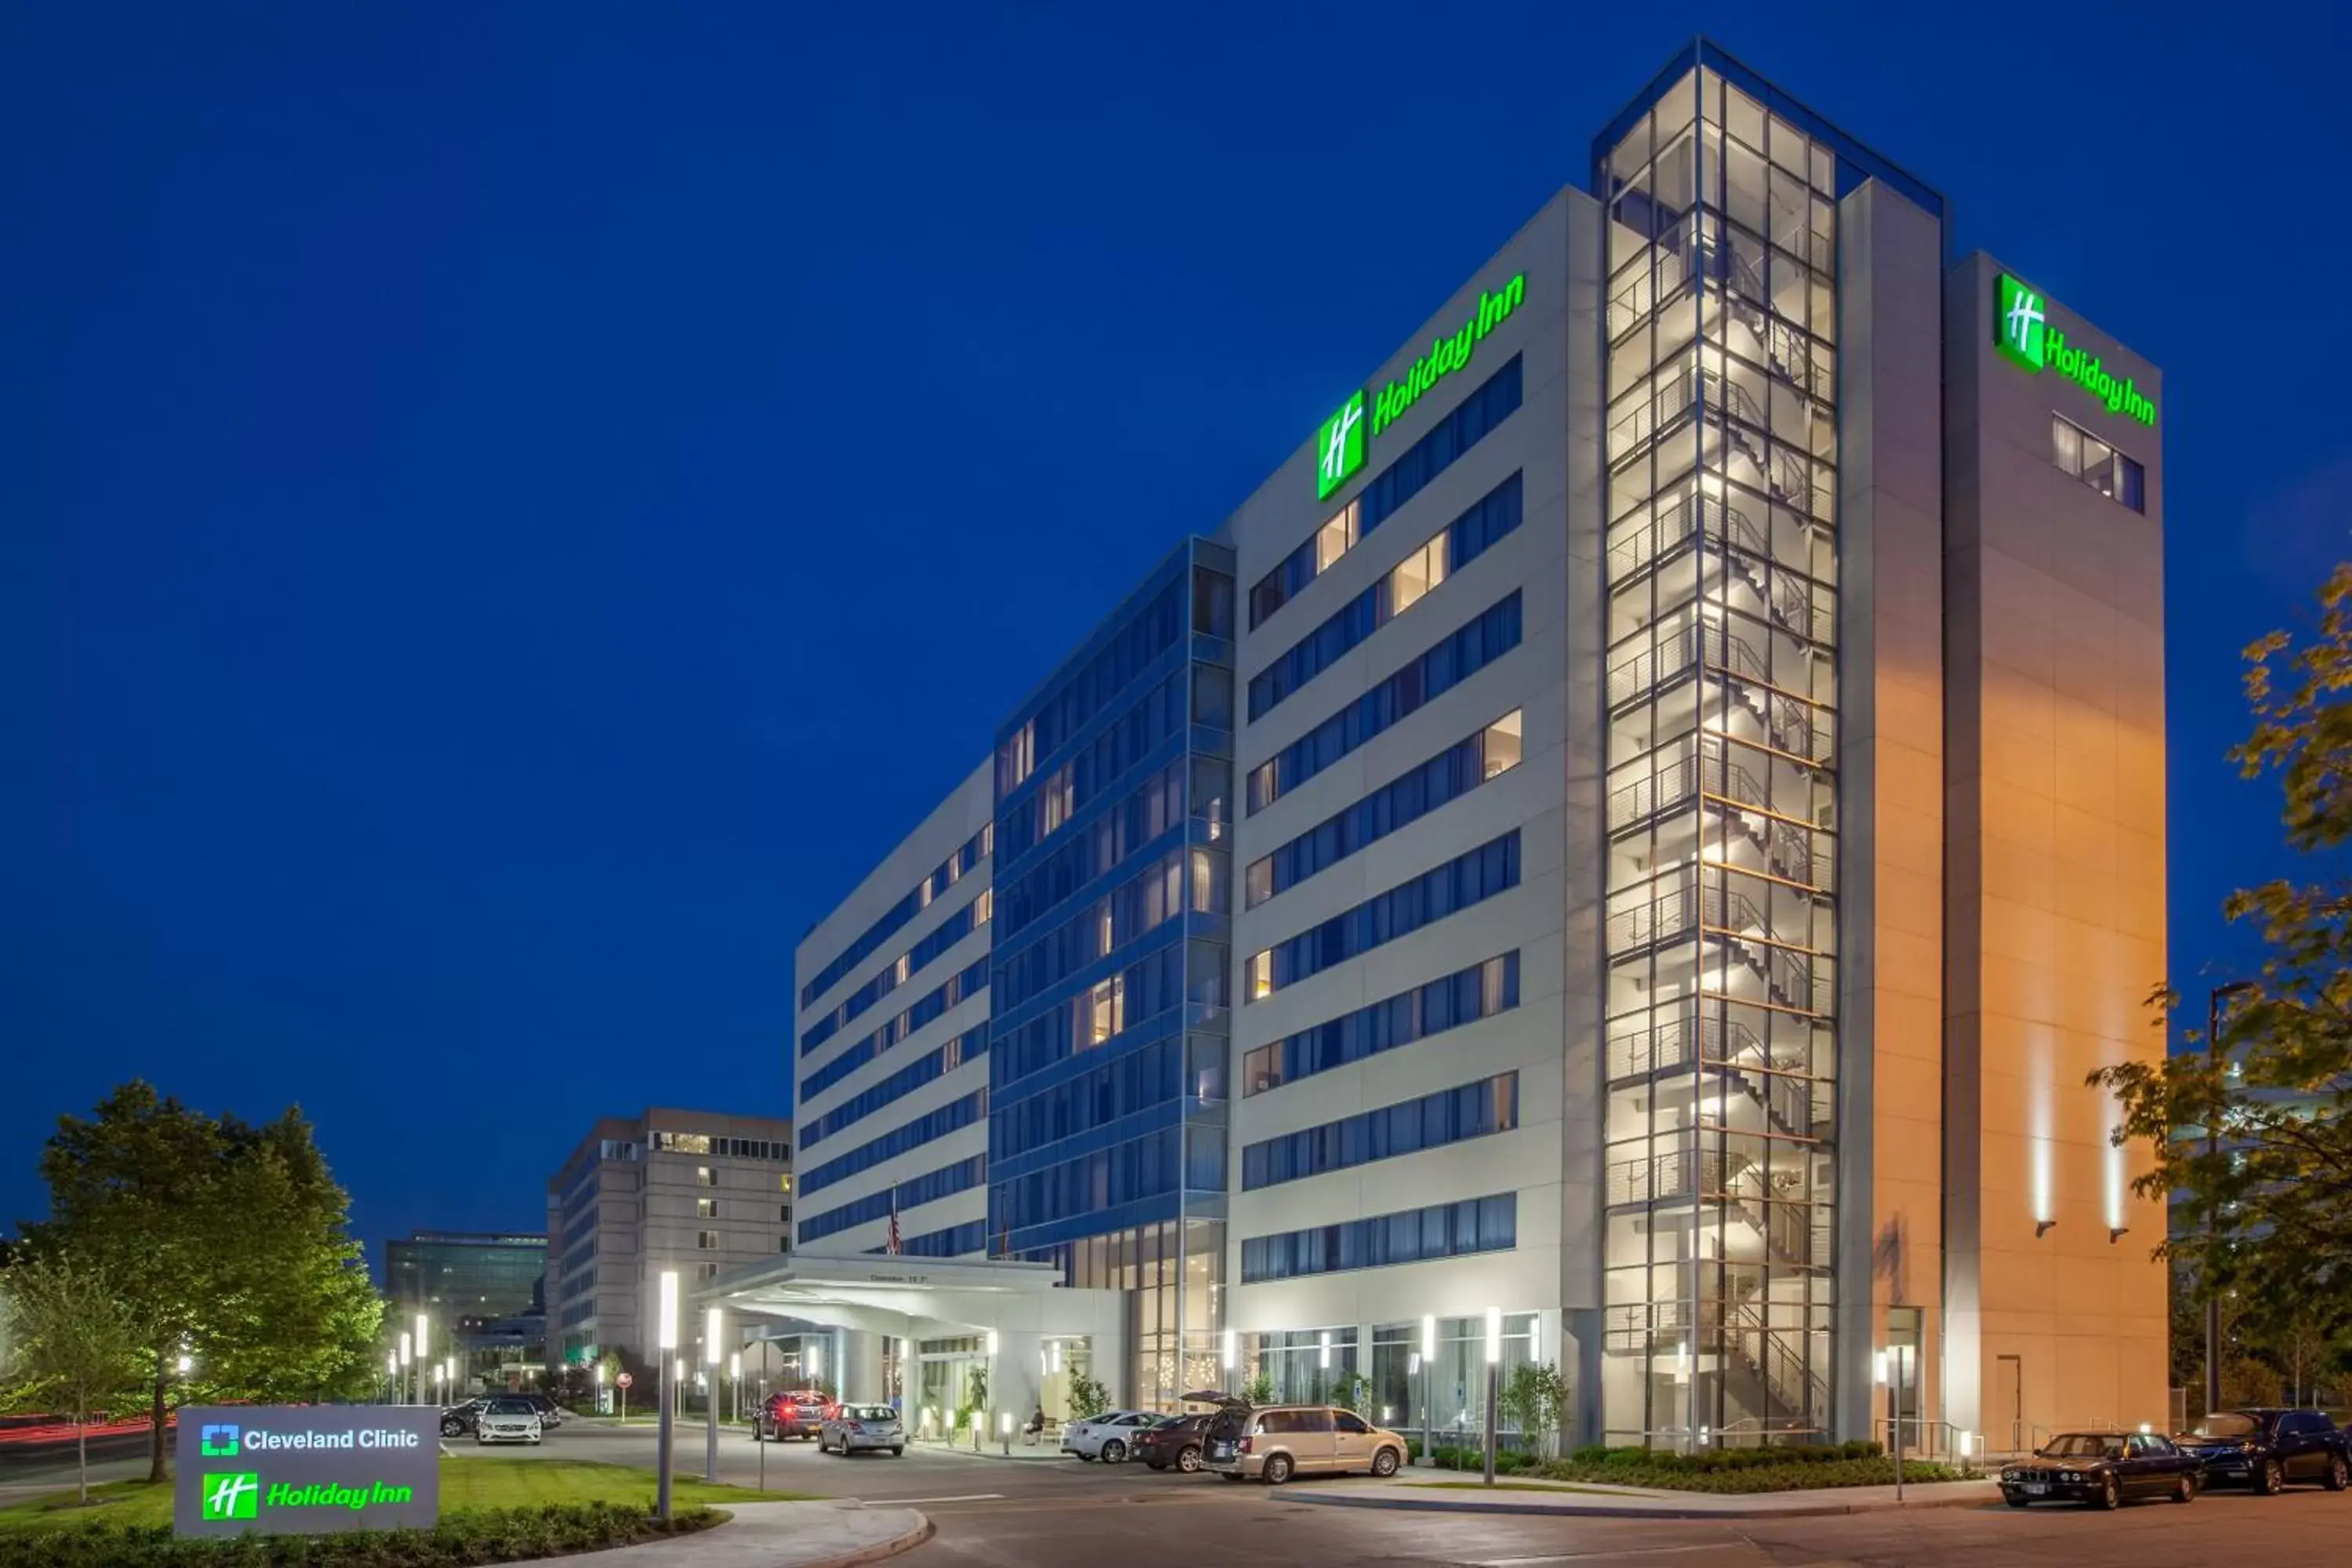 Property building in Holiday Inn Cleveland Clinic, an IHG Hotel